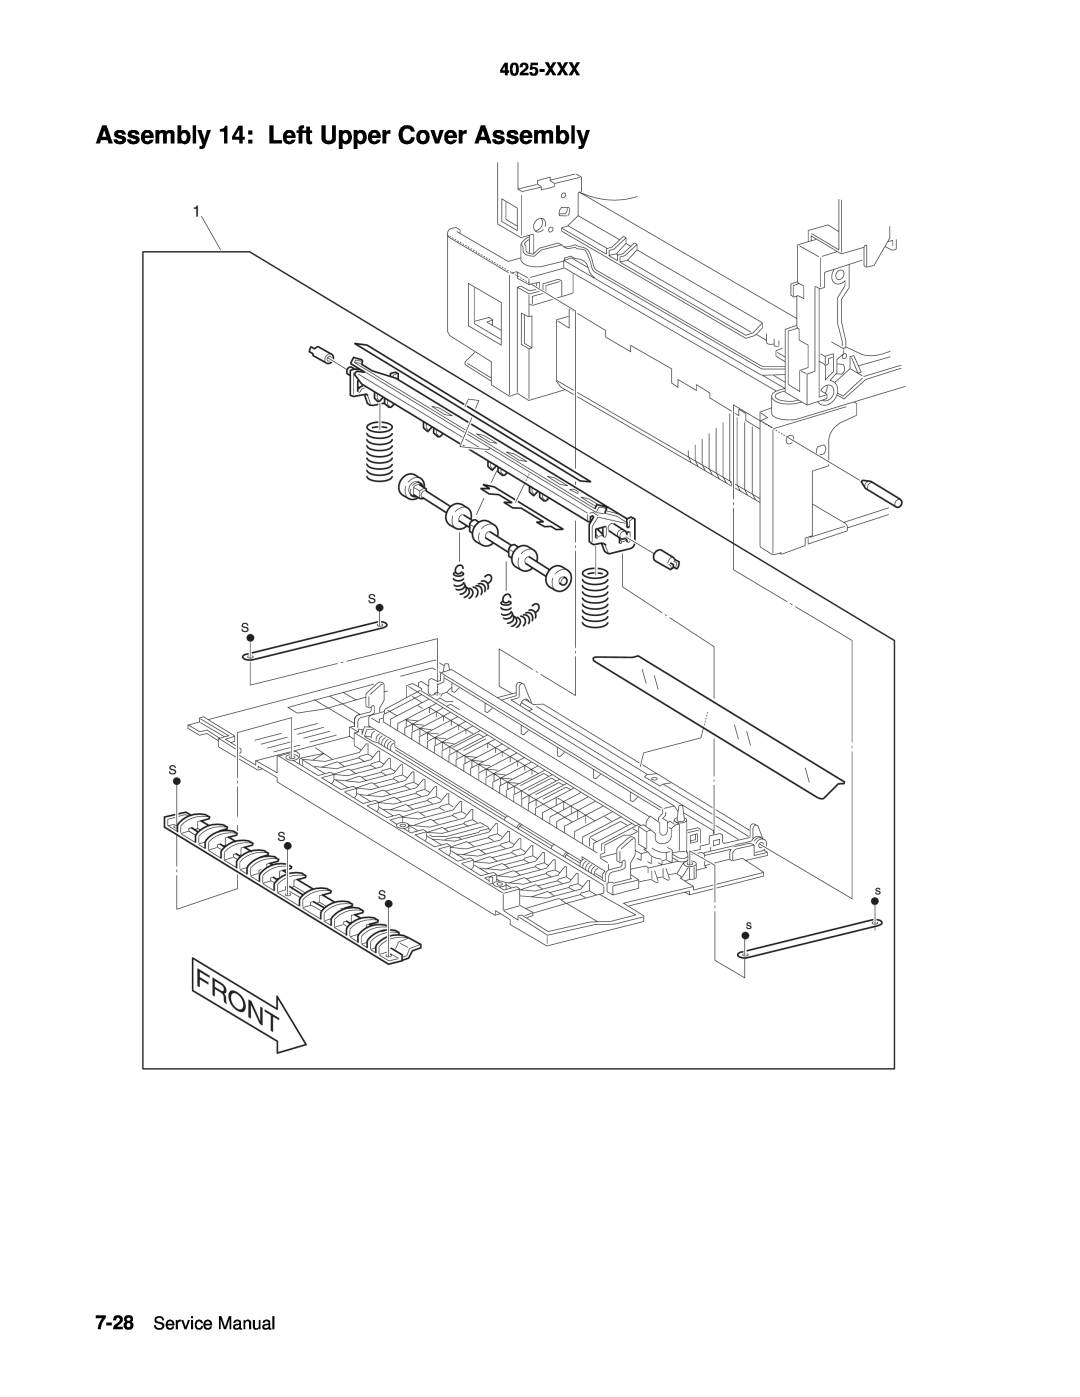 Lexmark W820 service manual Assembly 14 Left Upper Cover Assembly, 4025-XXX 